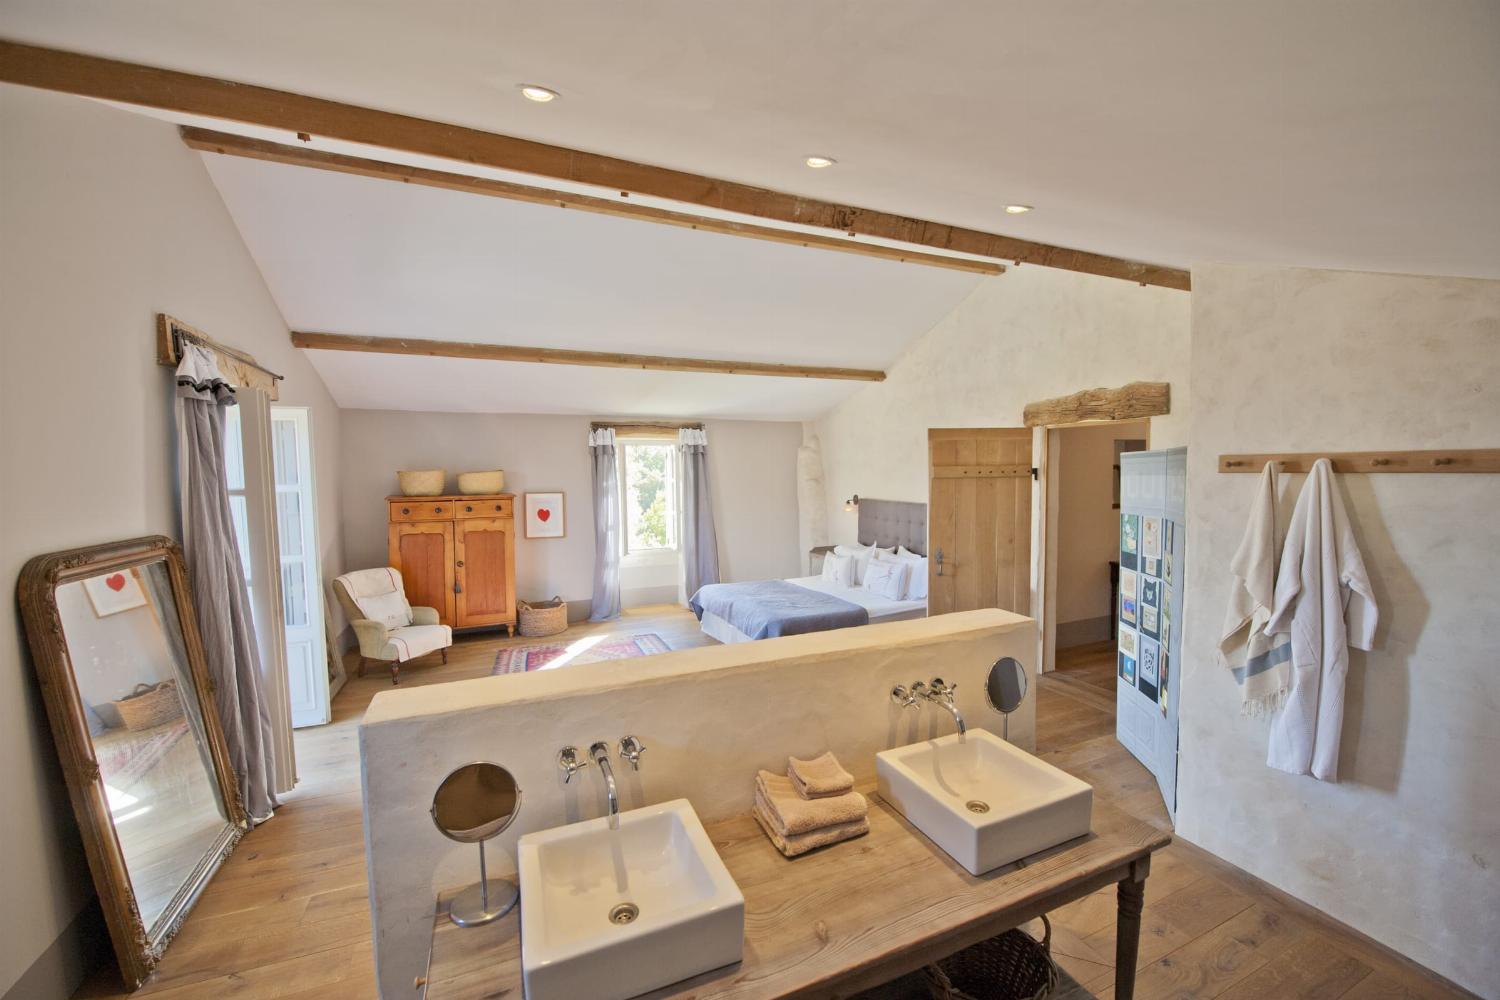 Bathroom | Holiday home in Nouvelle-Aquitaine